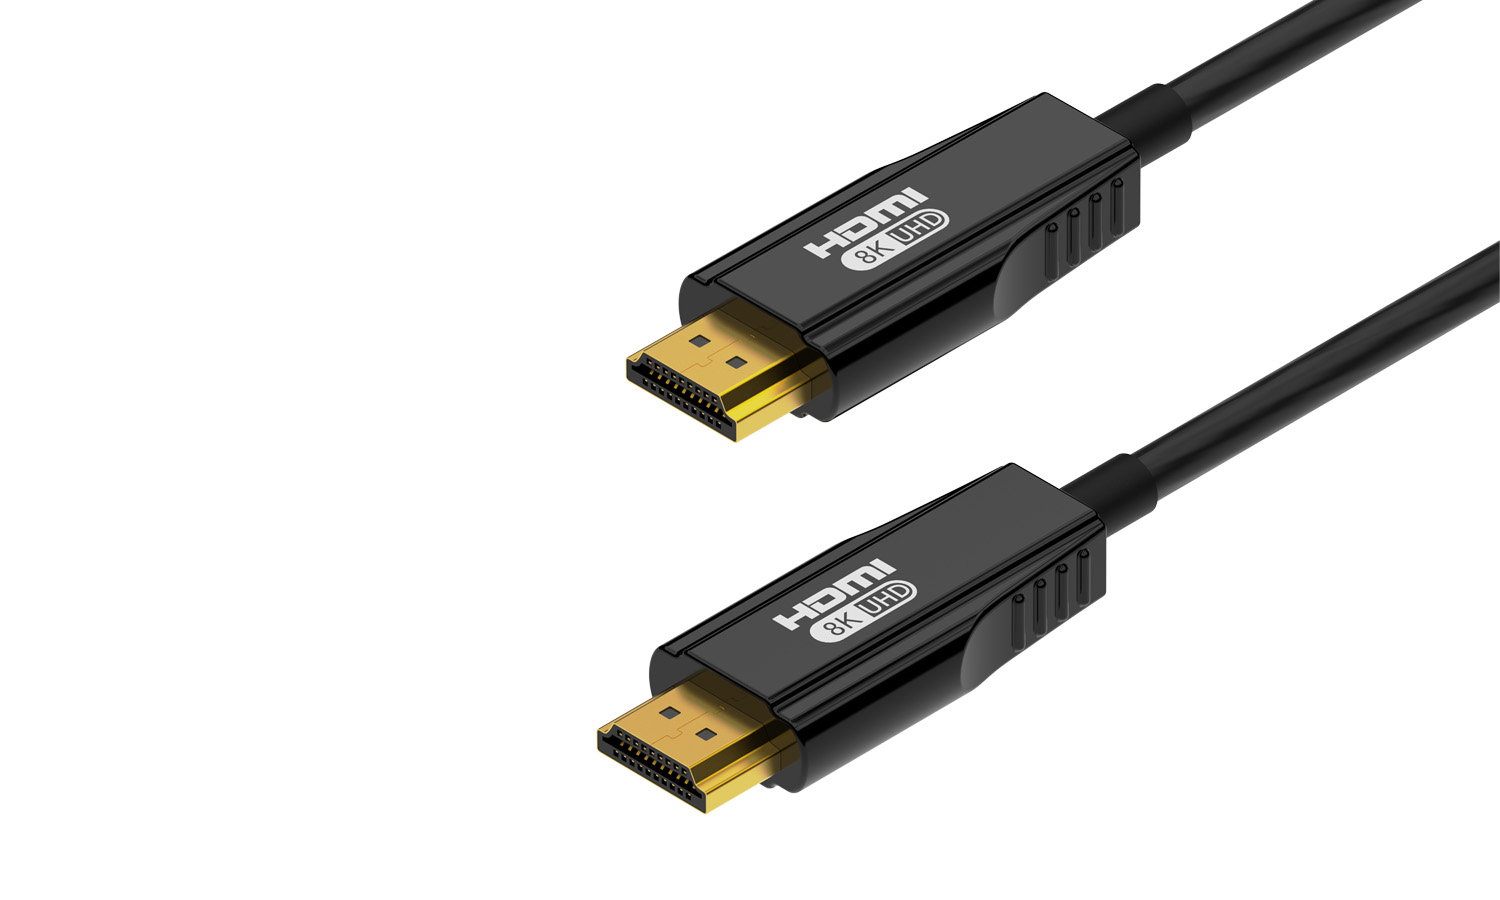 BG-CAB-H21A15 8K UHD HDMI 2.1 48Gbps Active Optical Cable - 15m/50ft by BZBGEAR